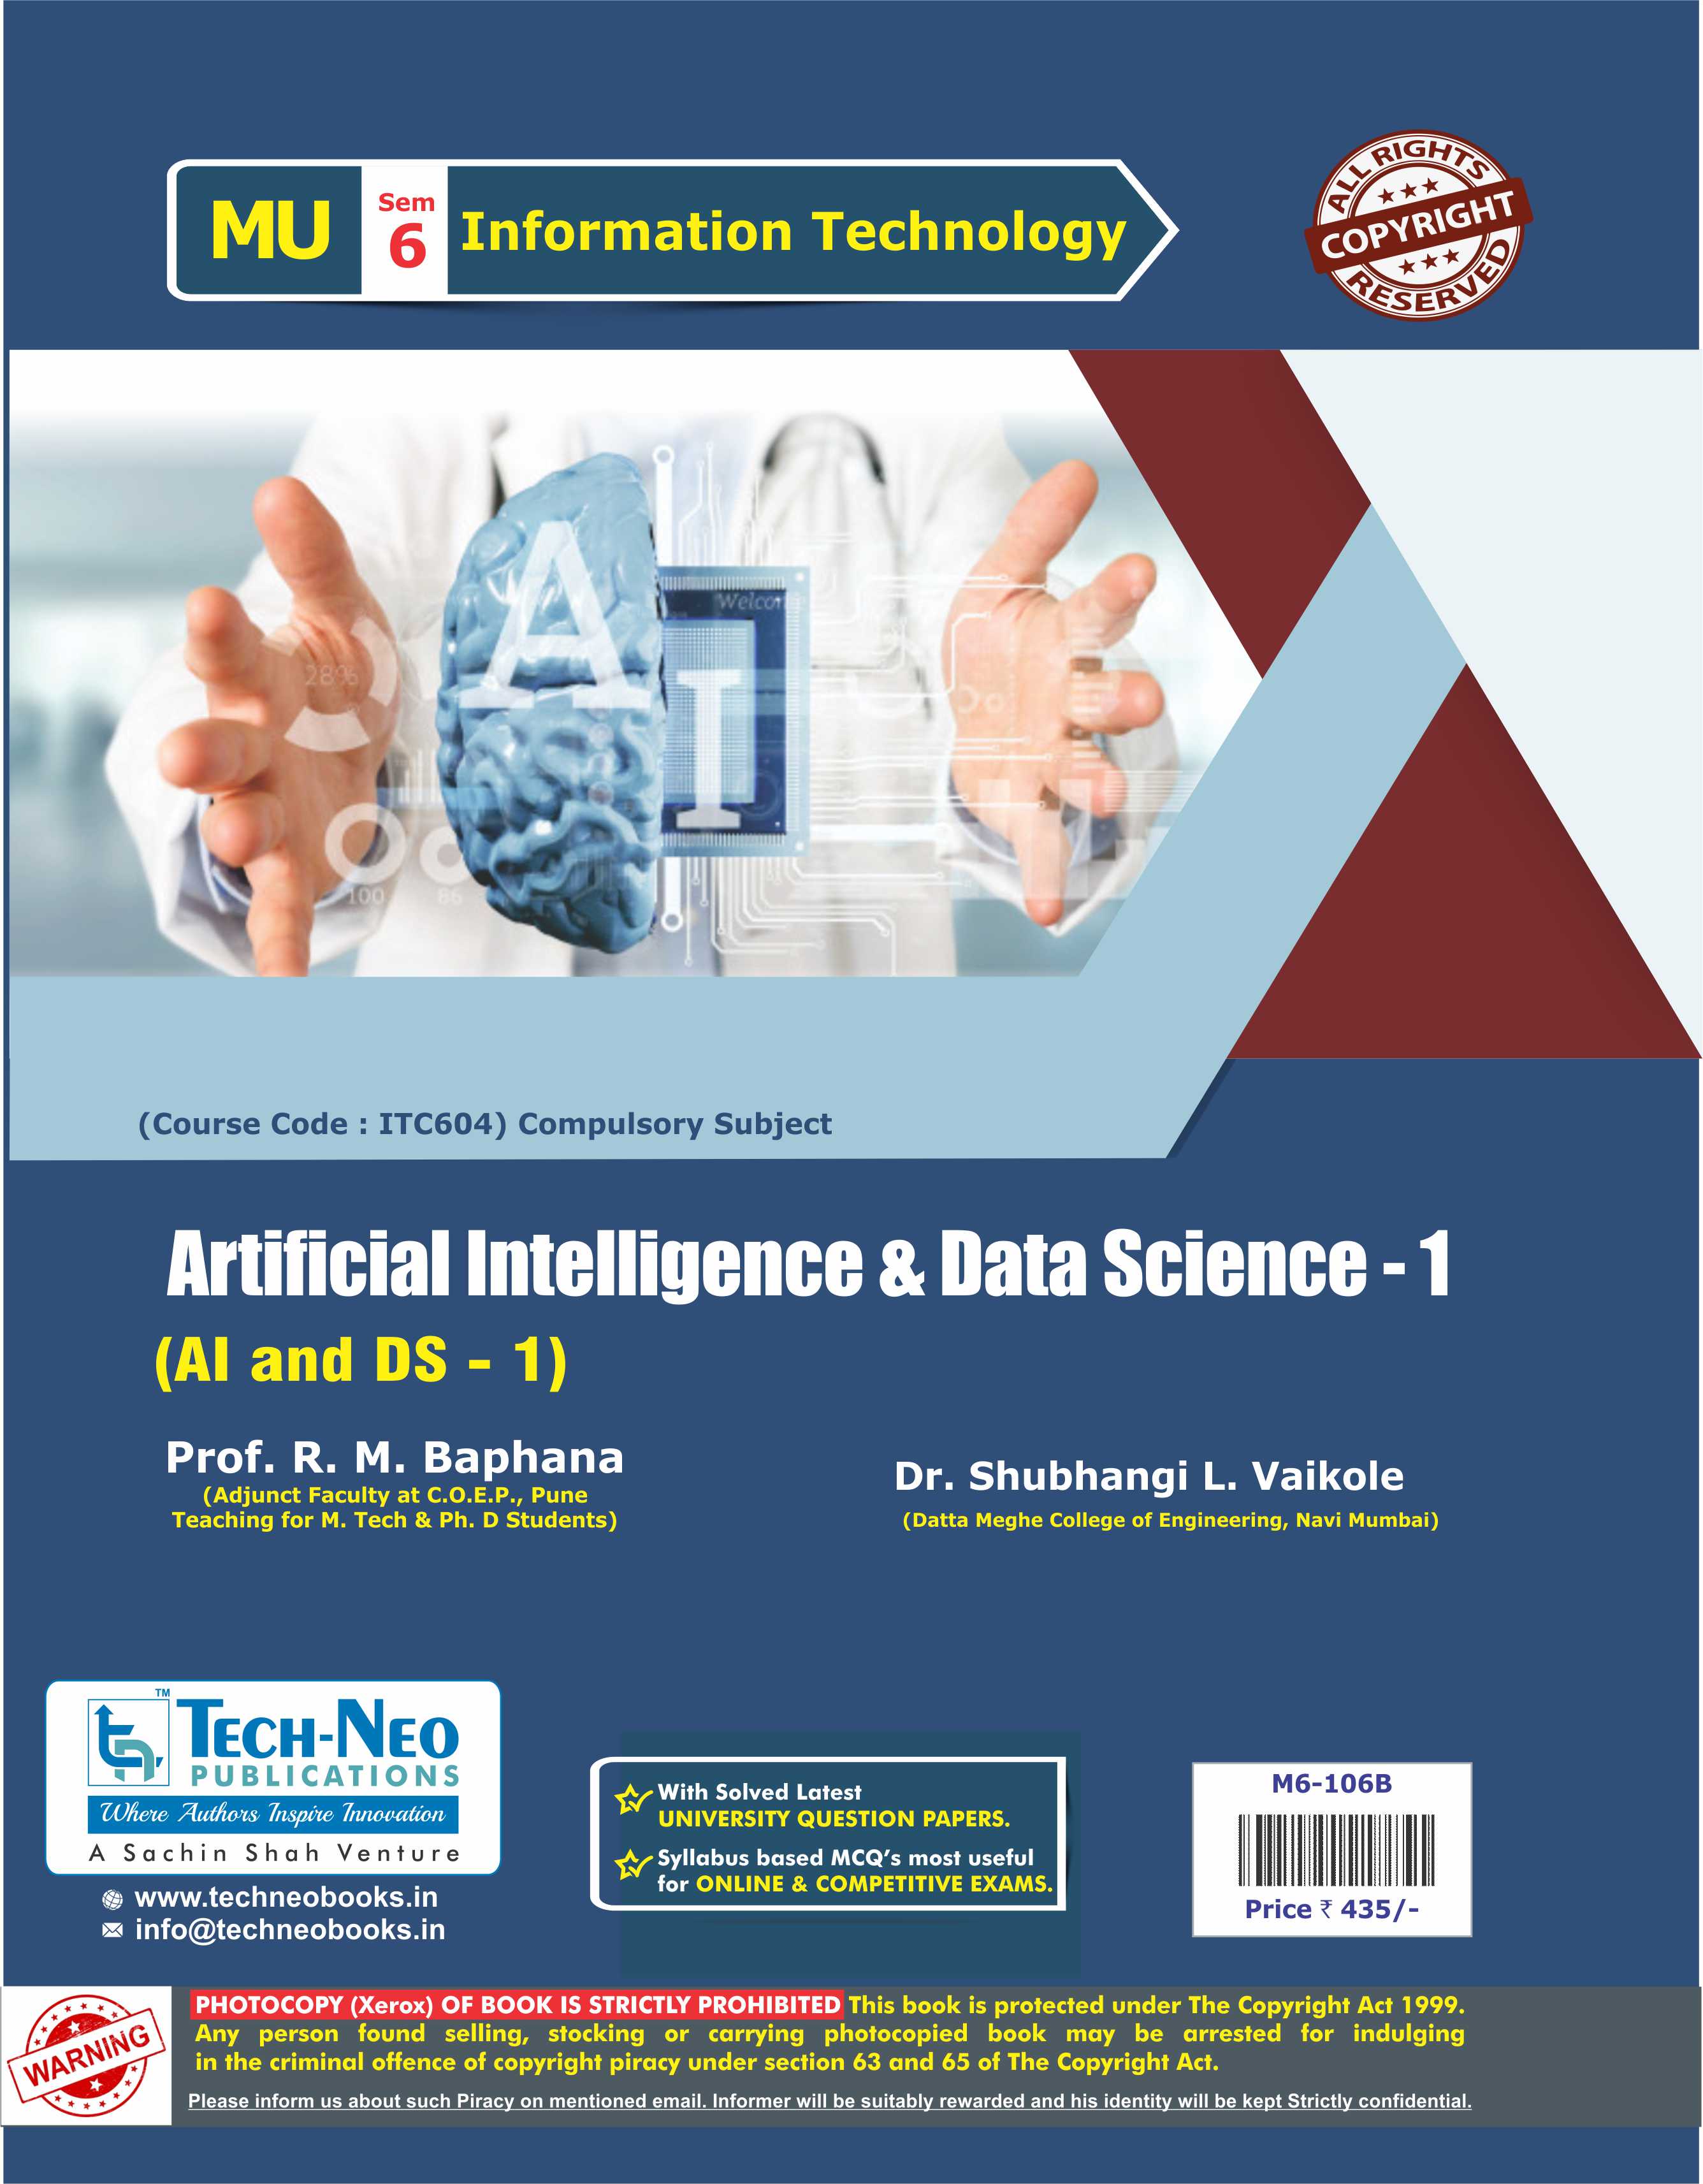 Artificial Intelligence & Data Science - 1